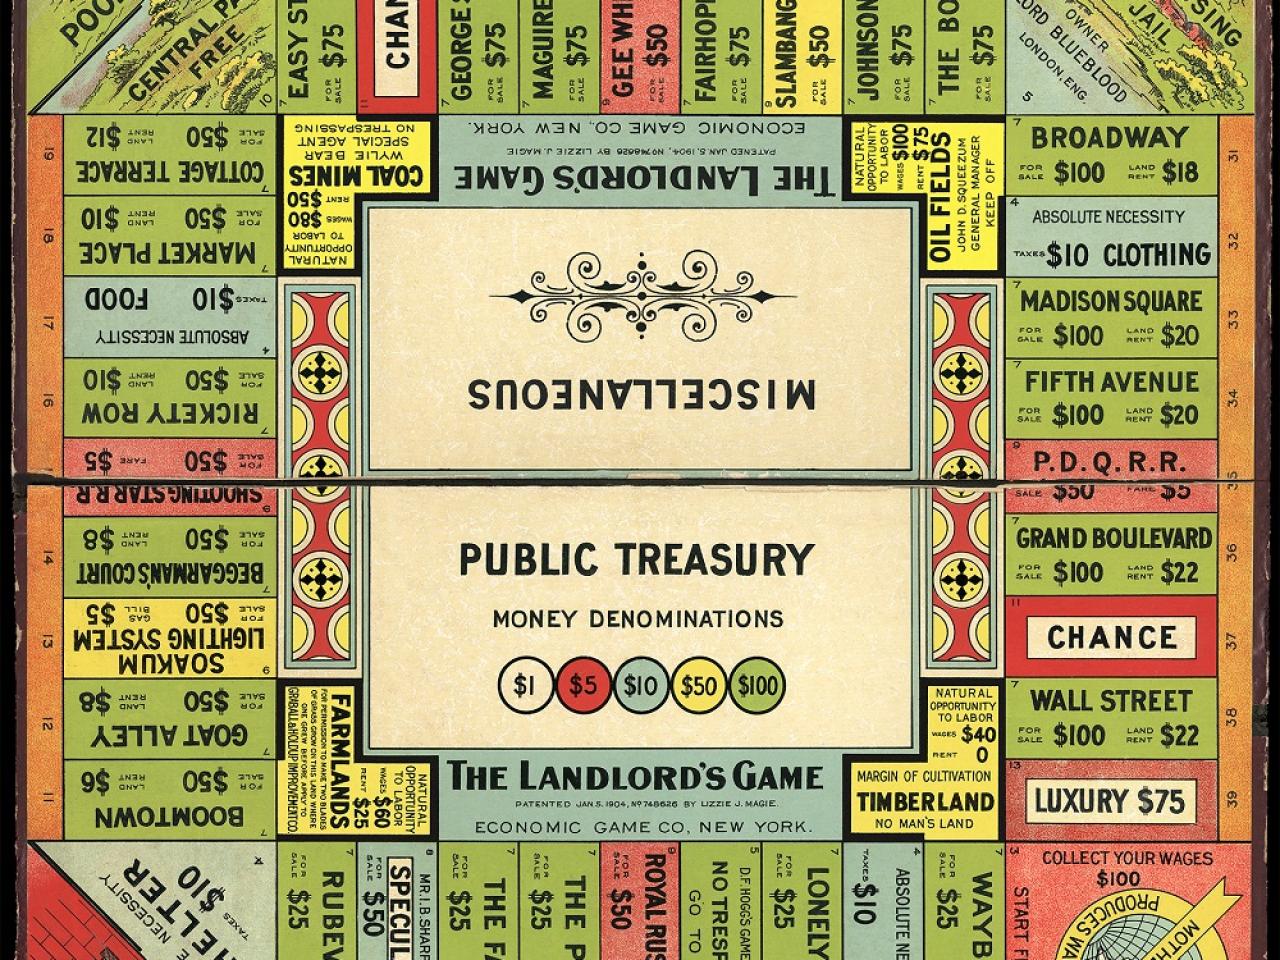 The Landlord's Game, 1906